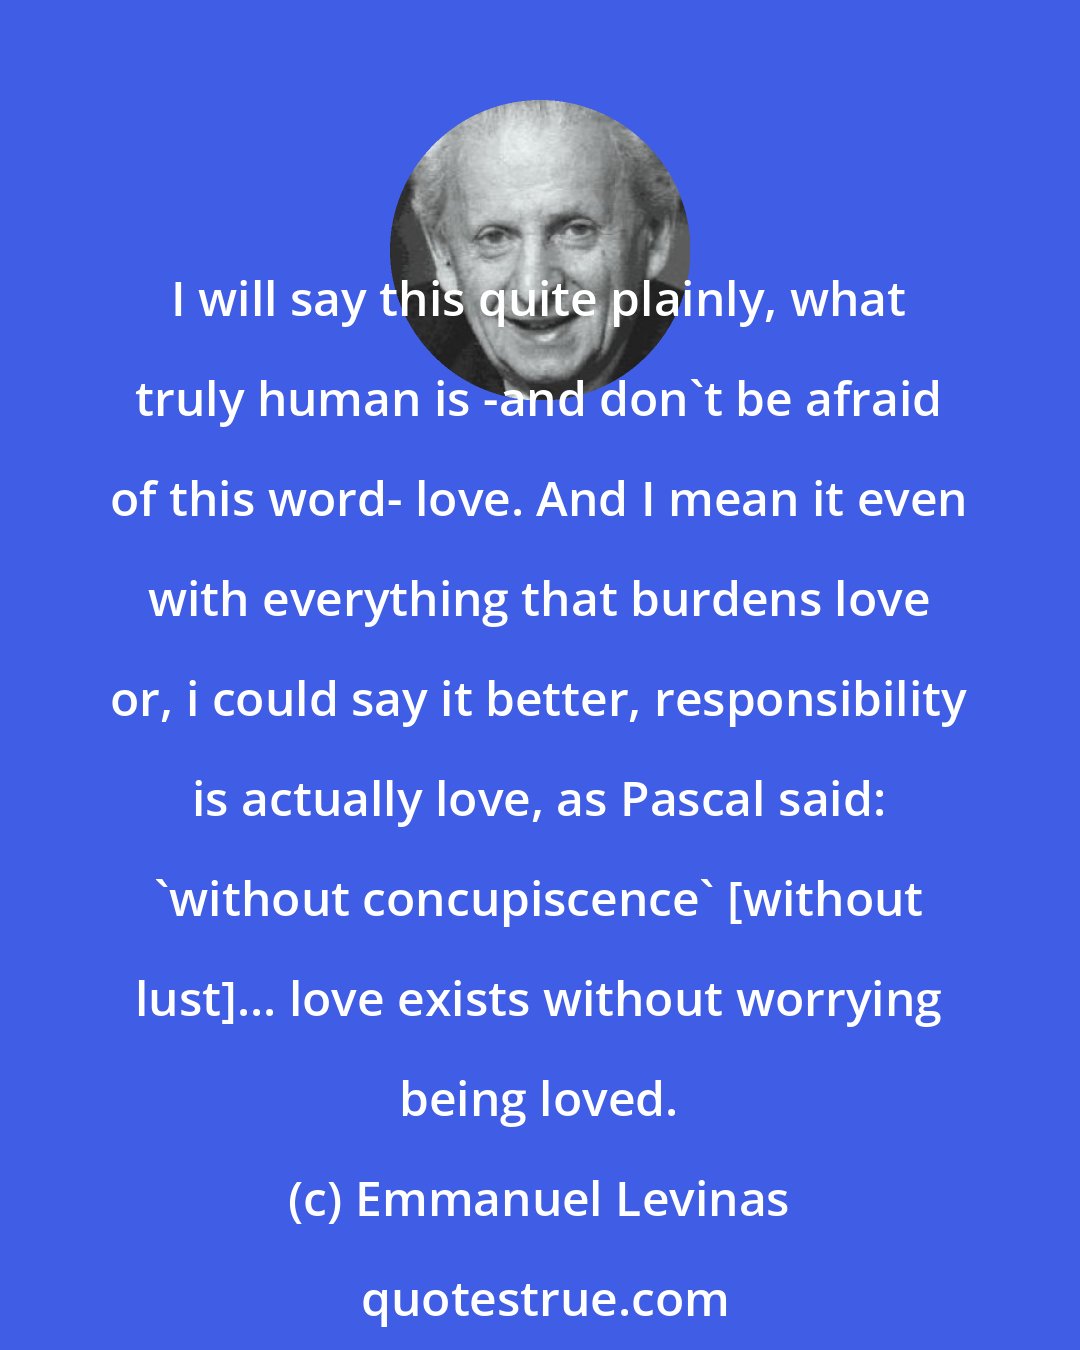 Emmanuel Levinas: I will say this quite plainly, what truly human is -and don't be afraid of this word- love. And I mean it even with everything that burdens love or, i could say it better, responsibility is actually love, as Pascal said: 'without concupiscence' [without lust]... love exists without worrying being loved.